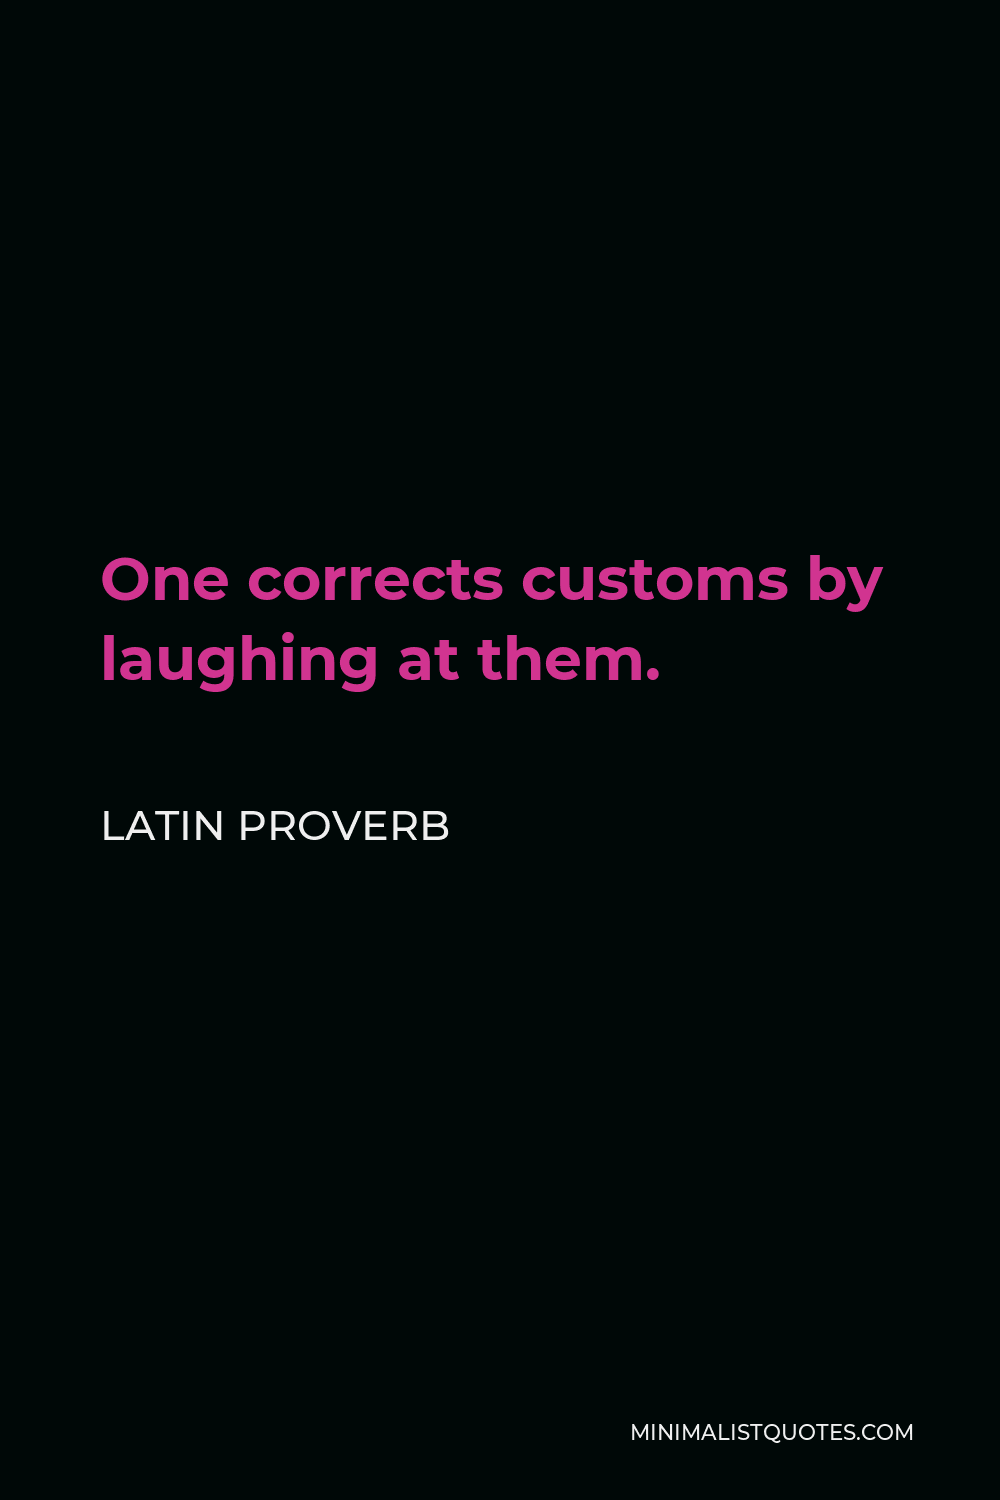 Latin Proverb Quote - One corrects customs by laughing at them.